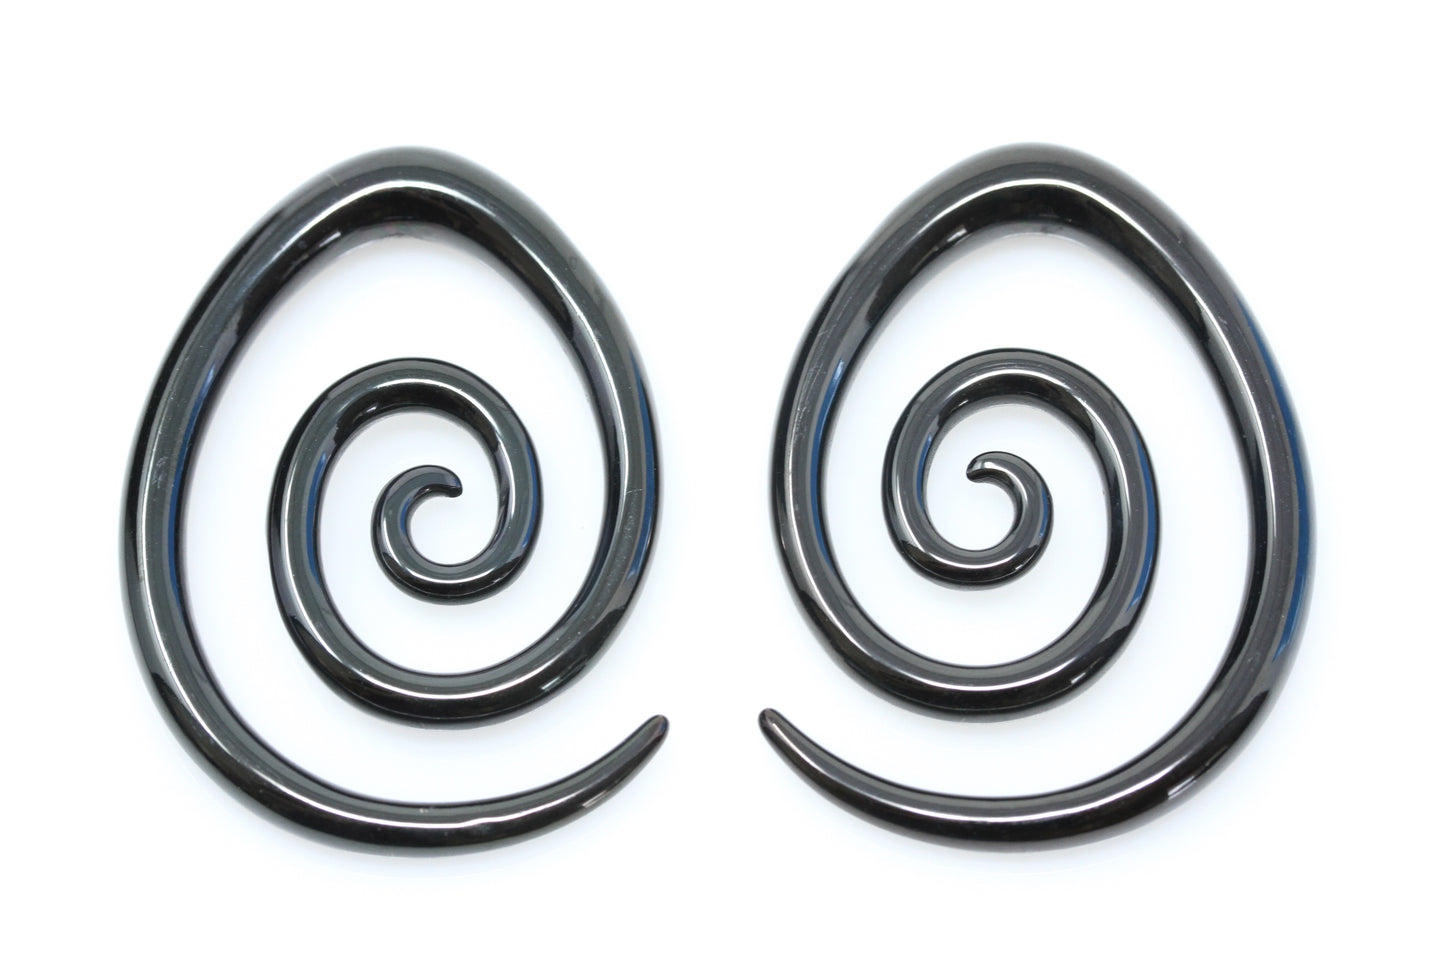 Stainless steel ear weights